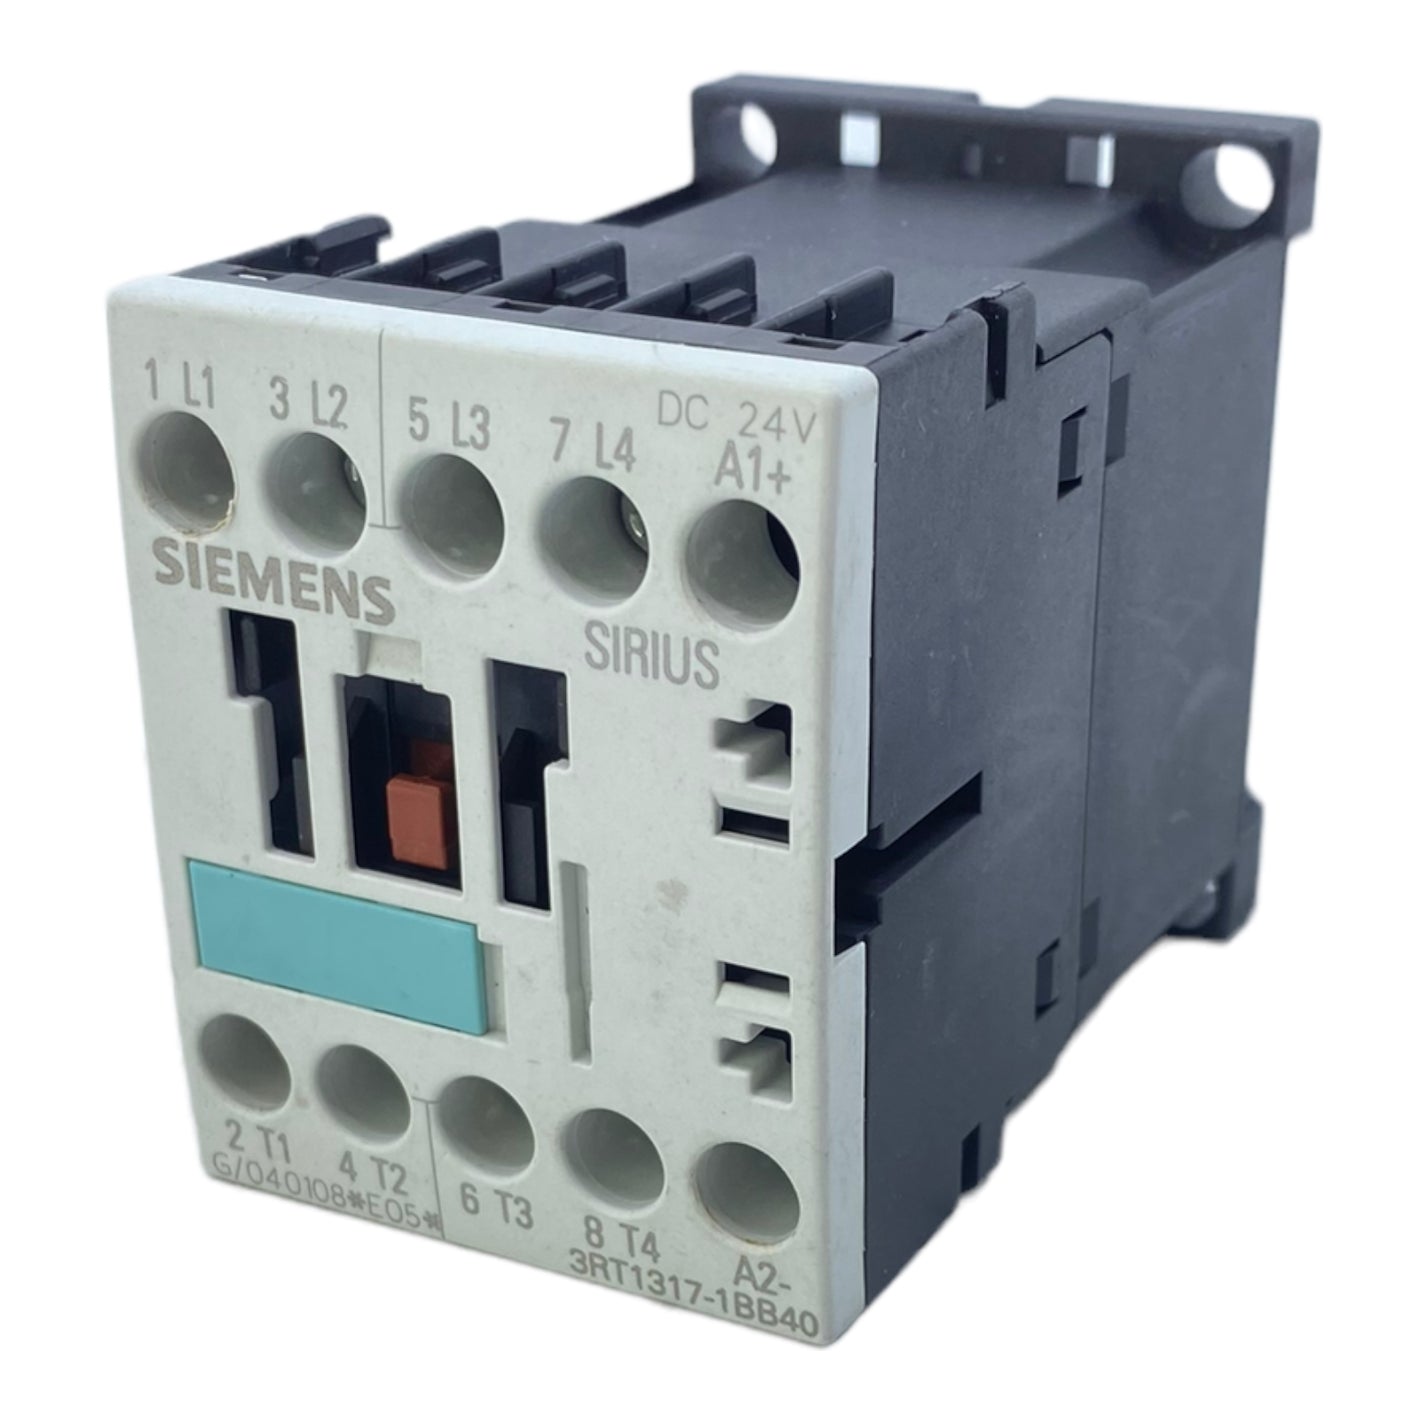 Siemens 3RT1317-1BB40 power contactor 4-pole 24 V DC 12 A 5.5 kW 